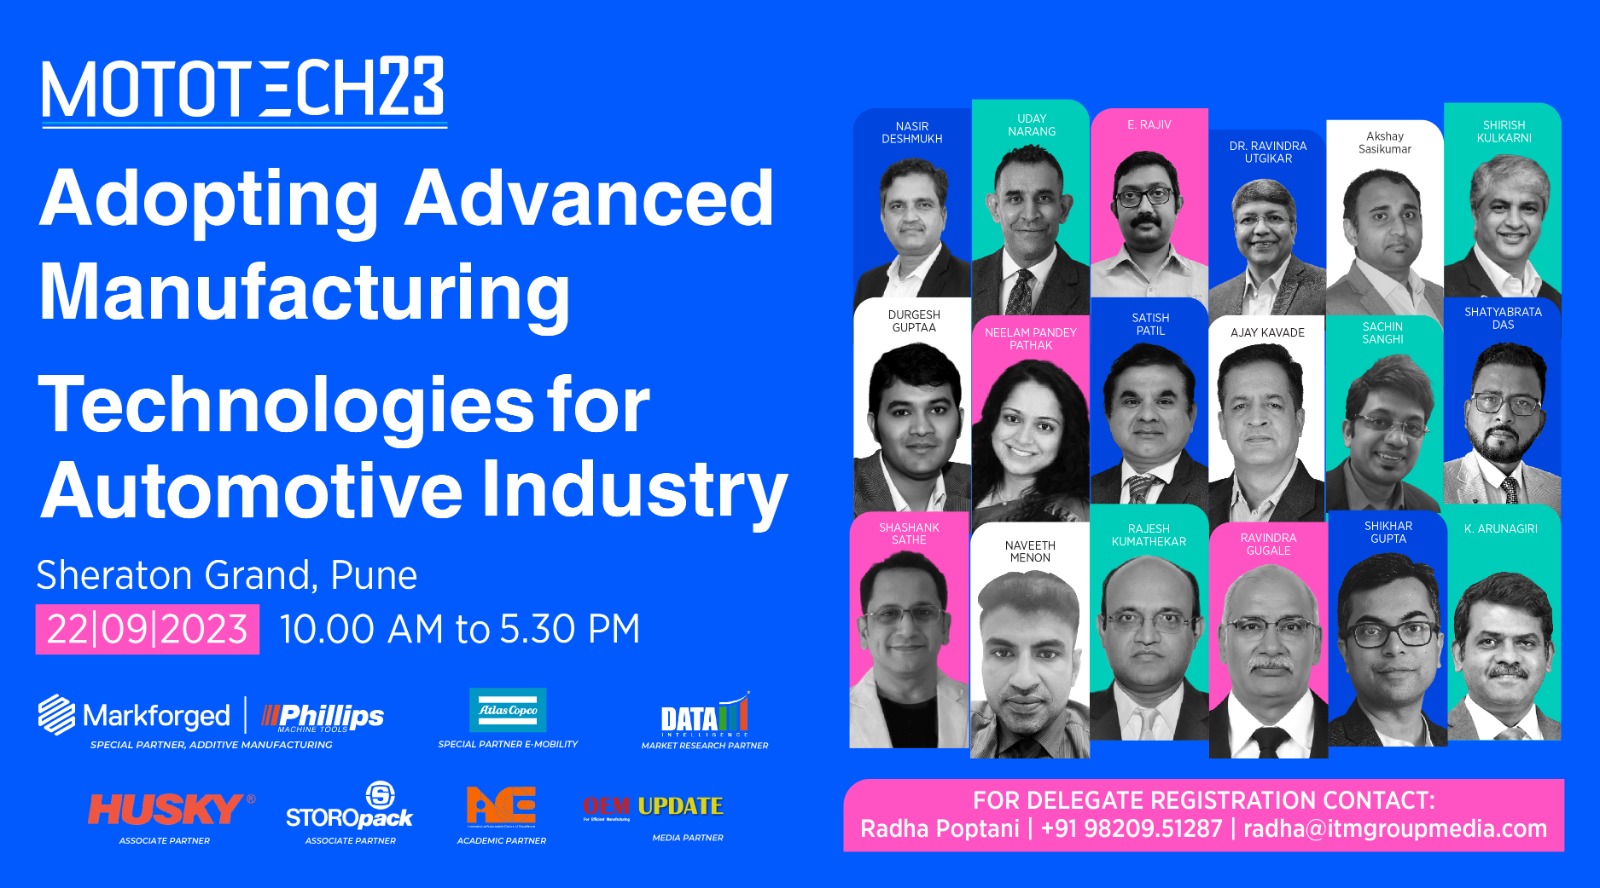 Nasir Deshmukh, Sr. Vice President of Manufacturing Operations at M&M takes the helm as Conference Chairman for MOTOTECH23